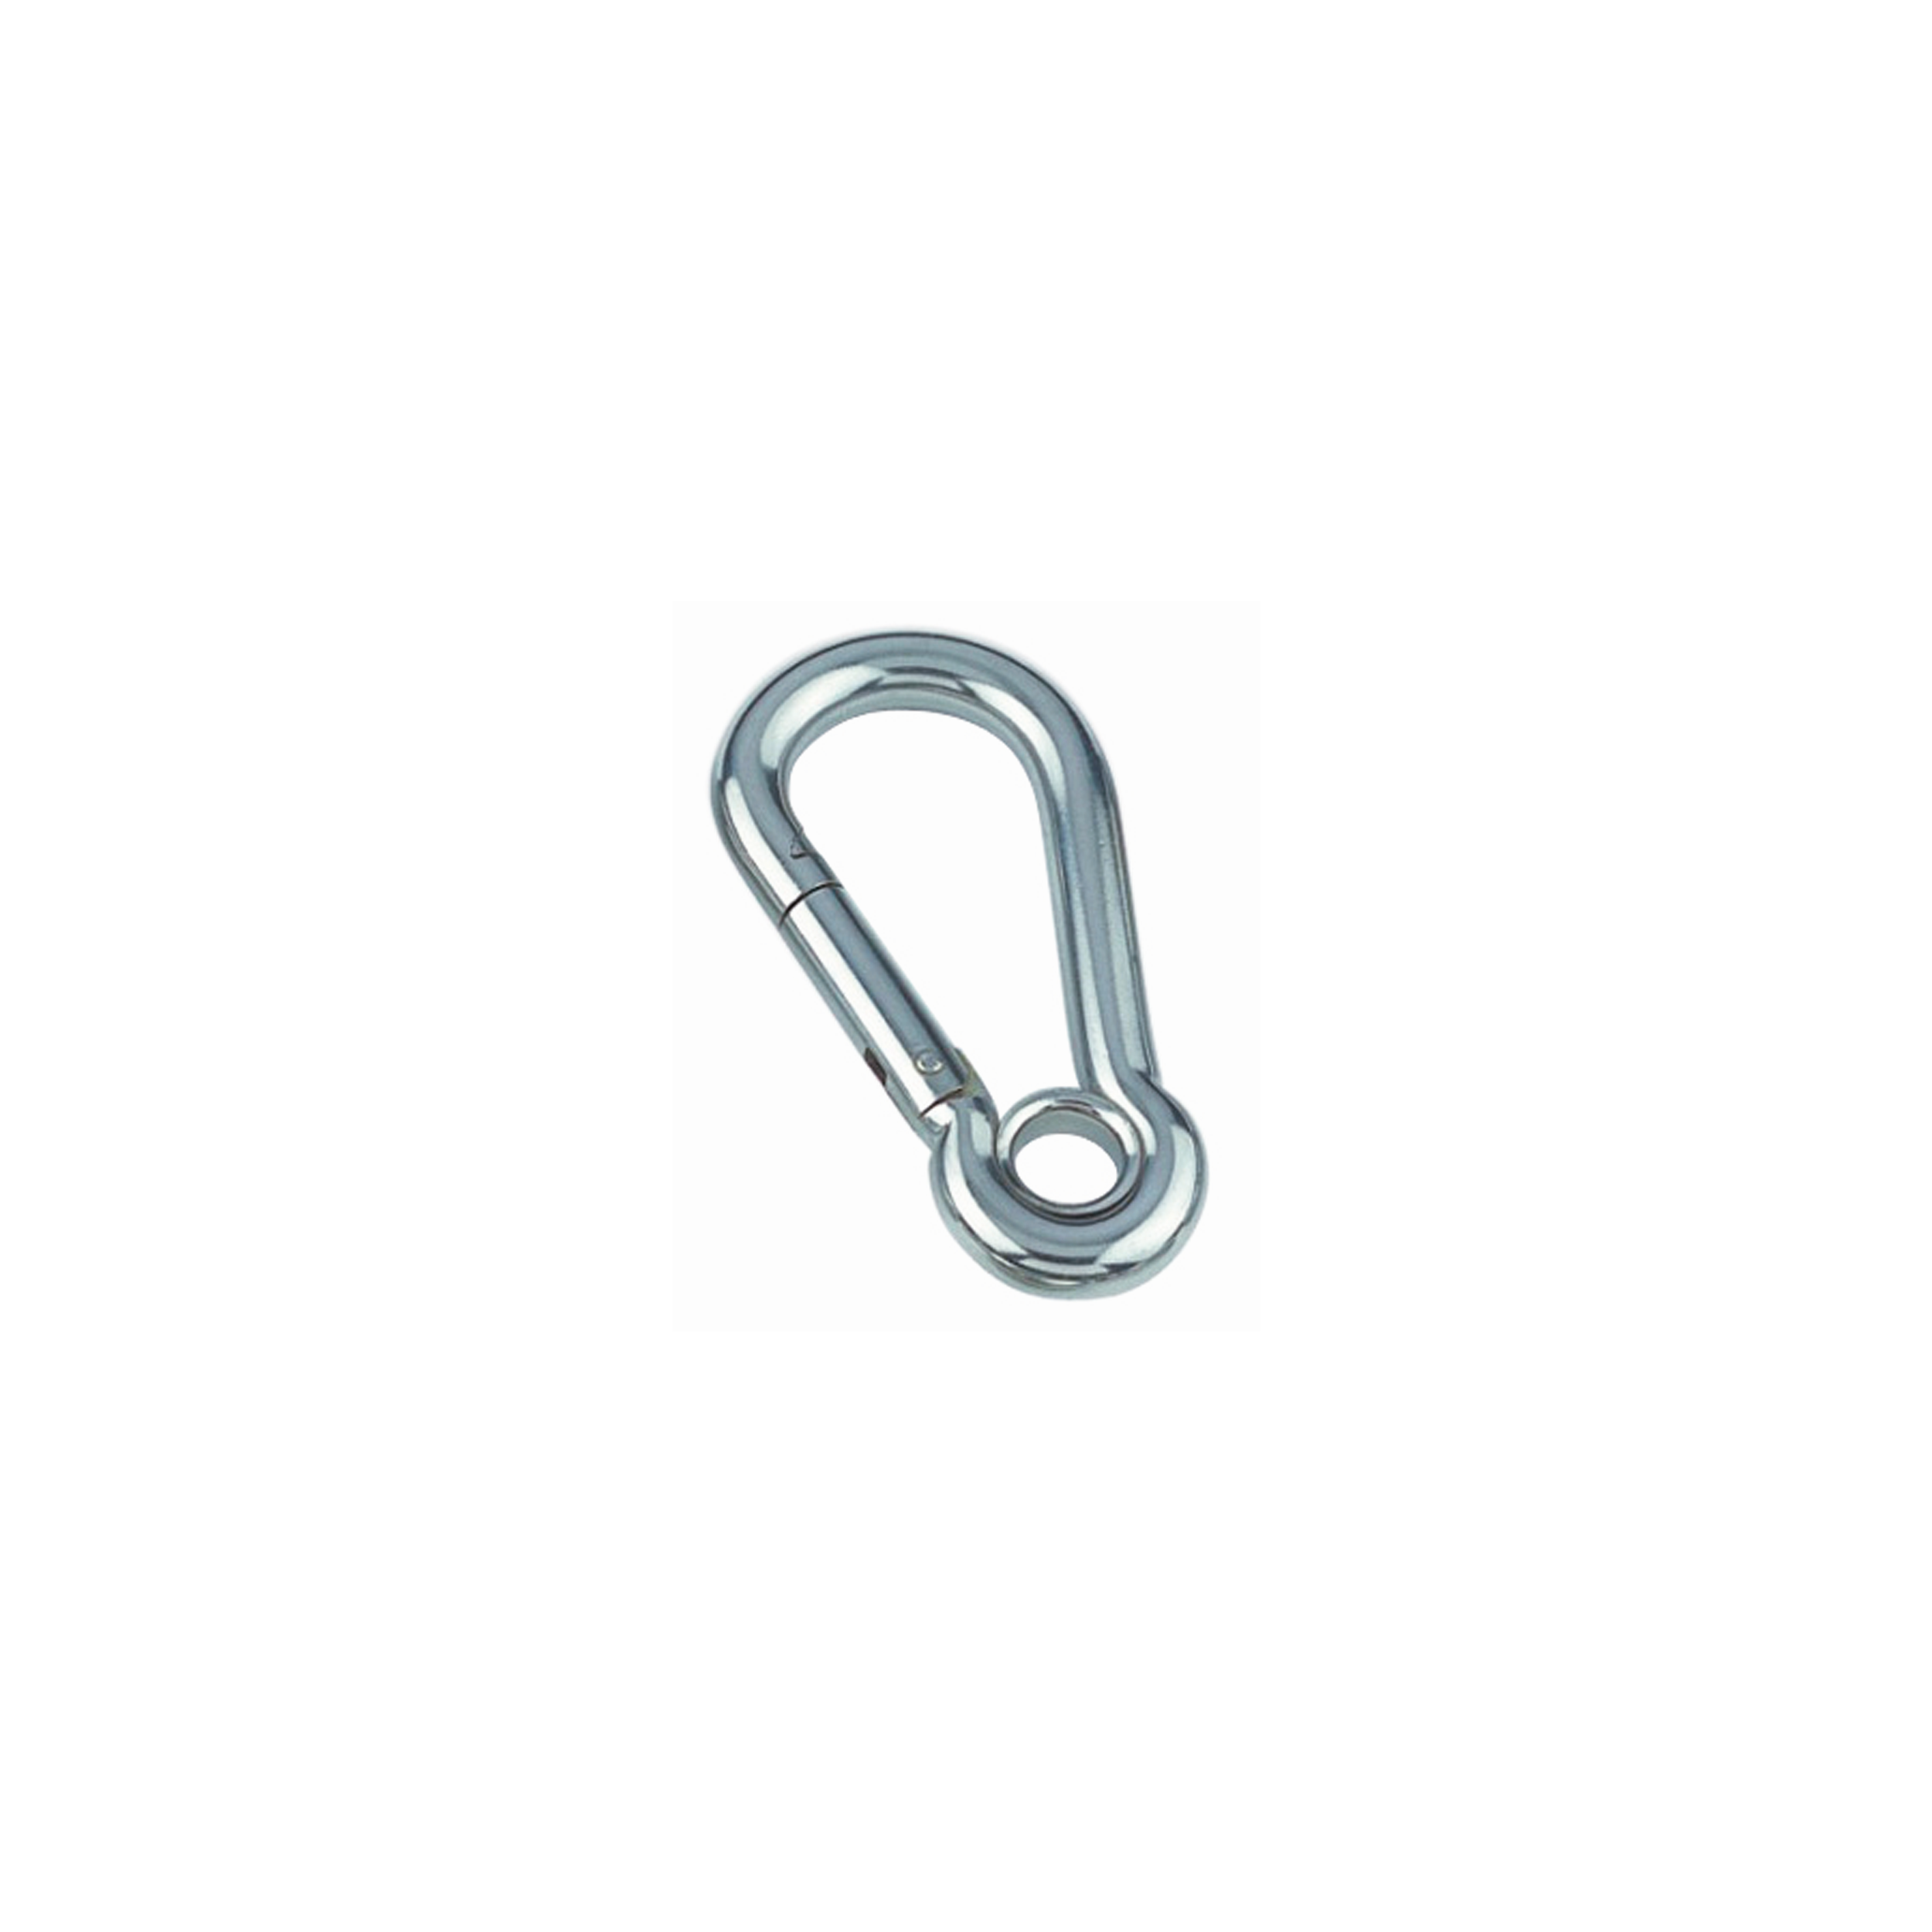 10 STCK / PCS. Spring hook with eyelet A4  7x70mm